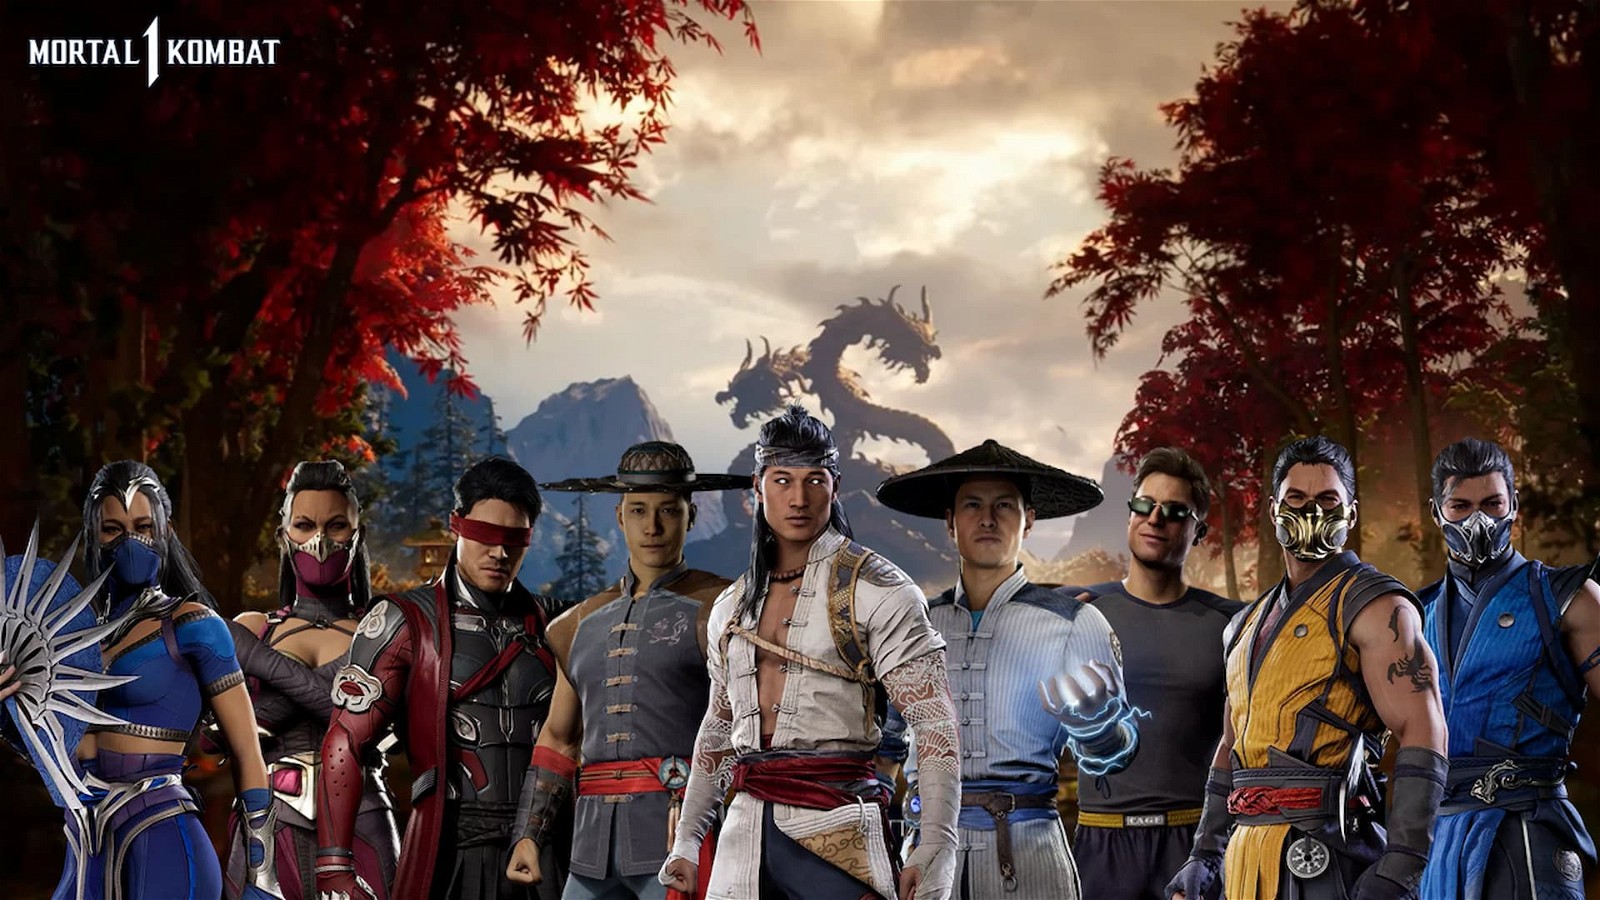 Mortal Kombat 1 is now available in early access, full launch on September 19